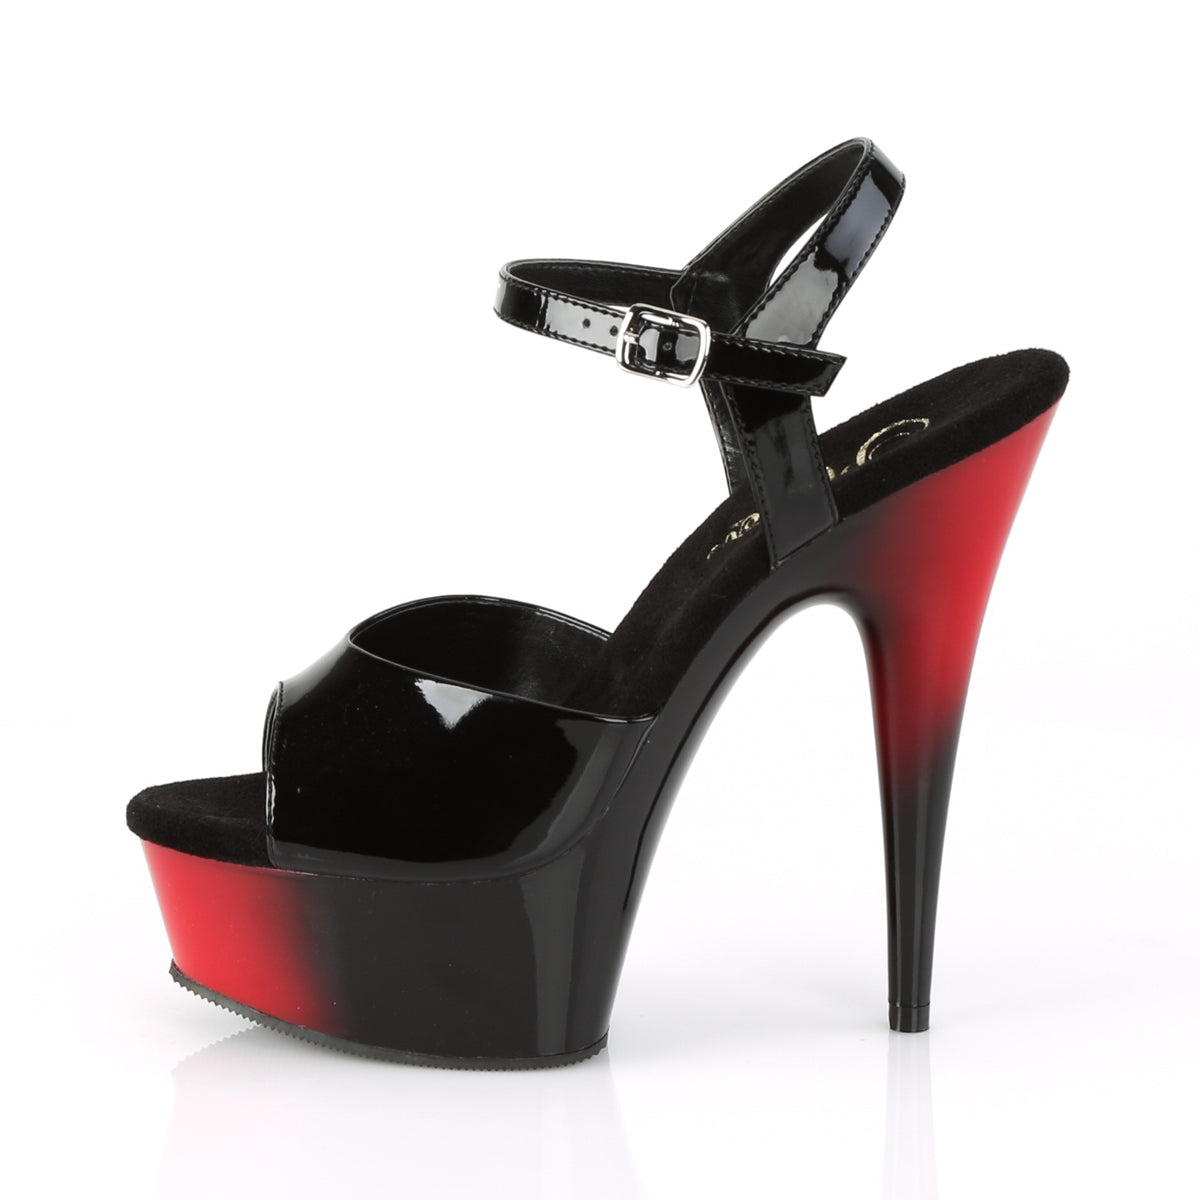 DELIGHT-609BR 6" Heel Black and Red Pole Dancing Platforms-Pleaser- Sexy Shoes Pole Dance Heels